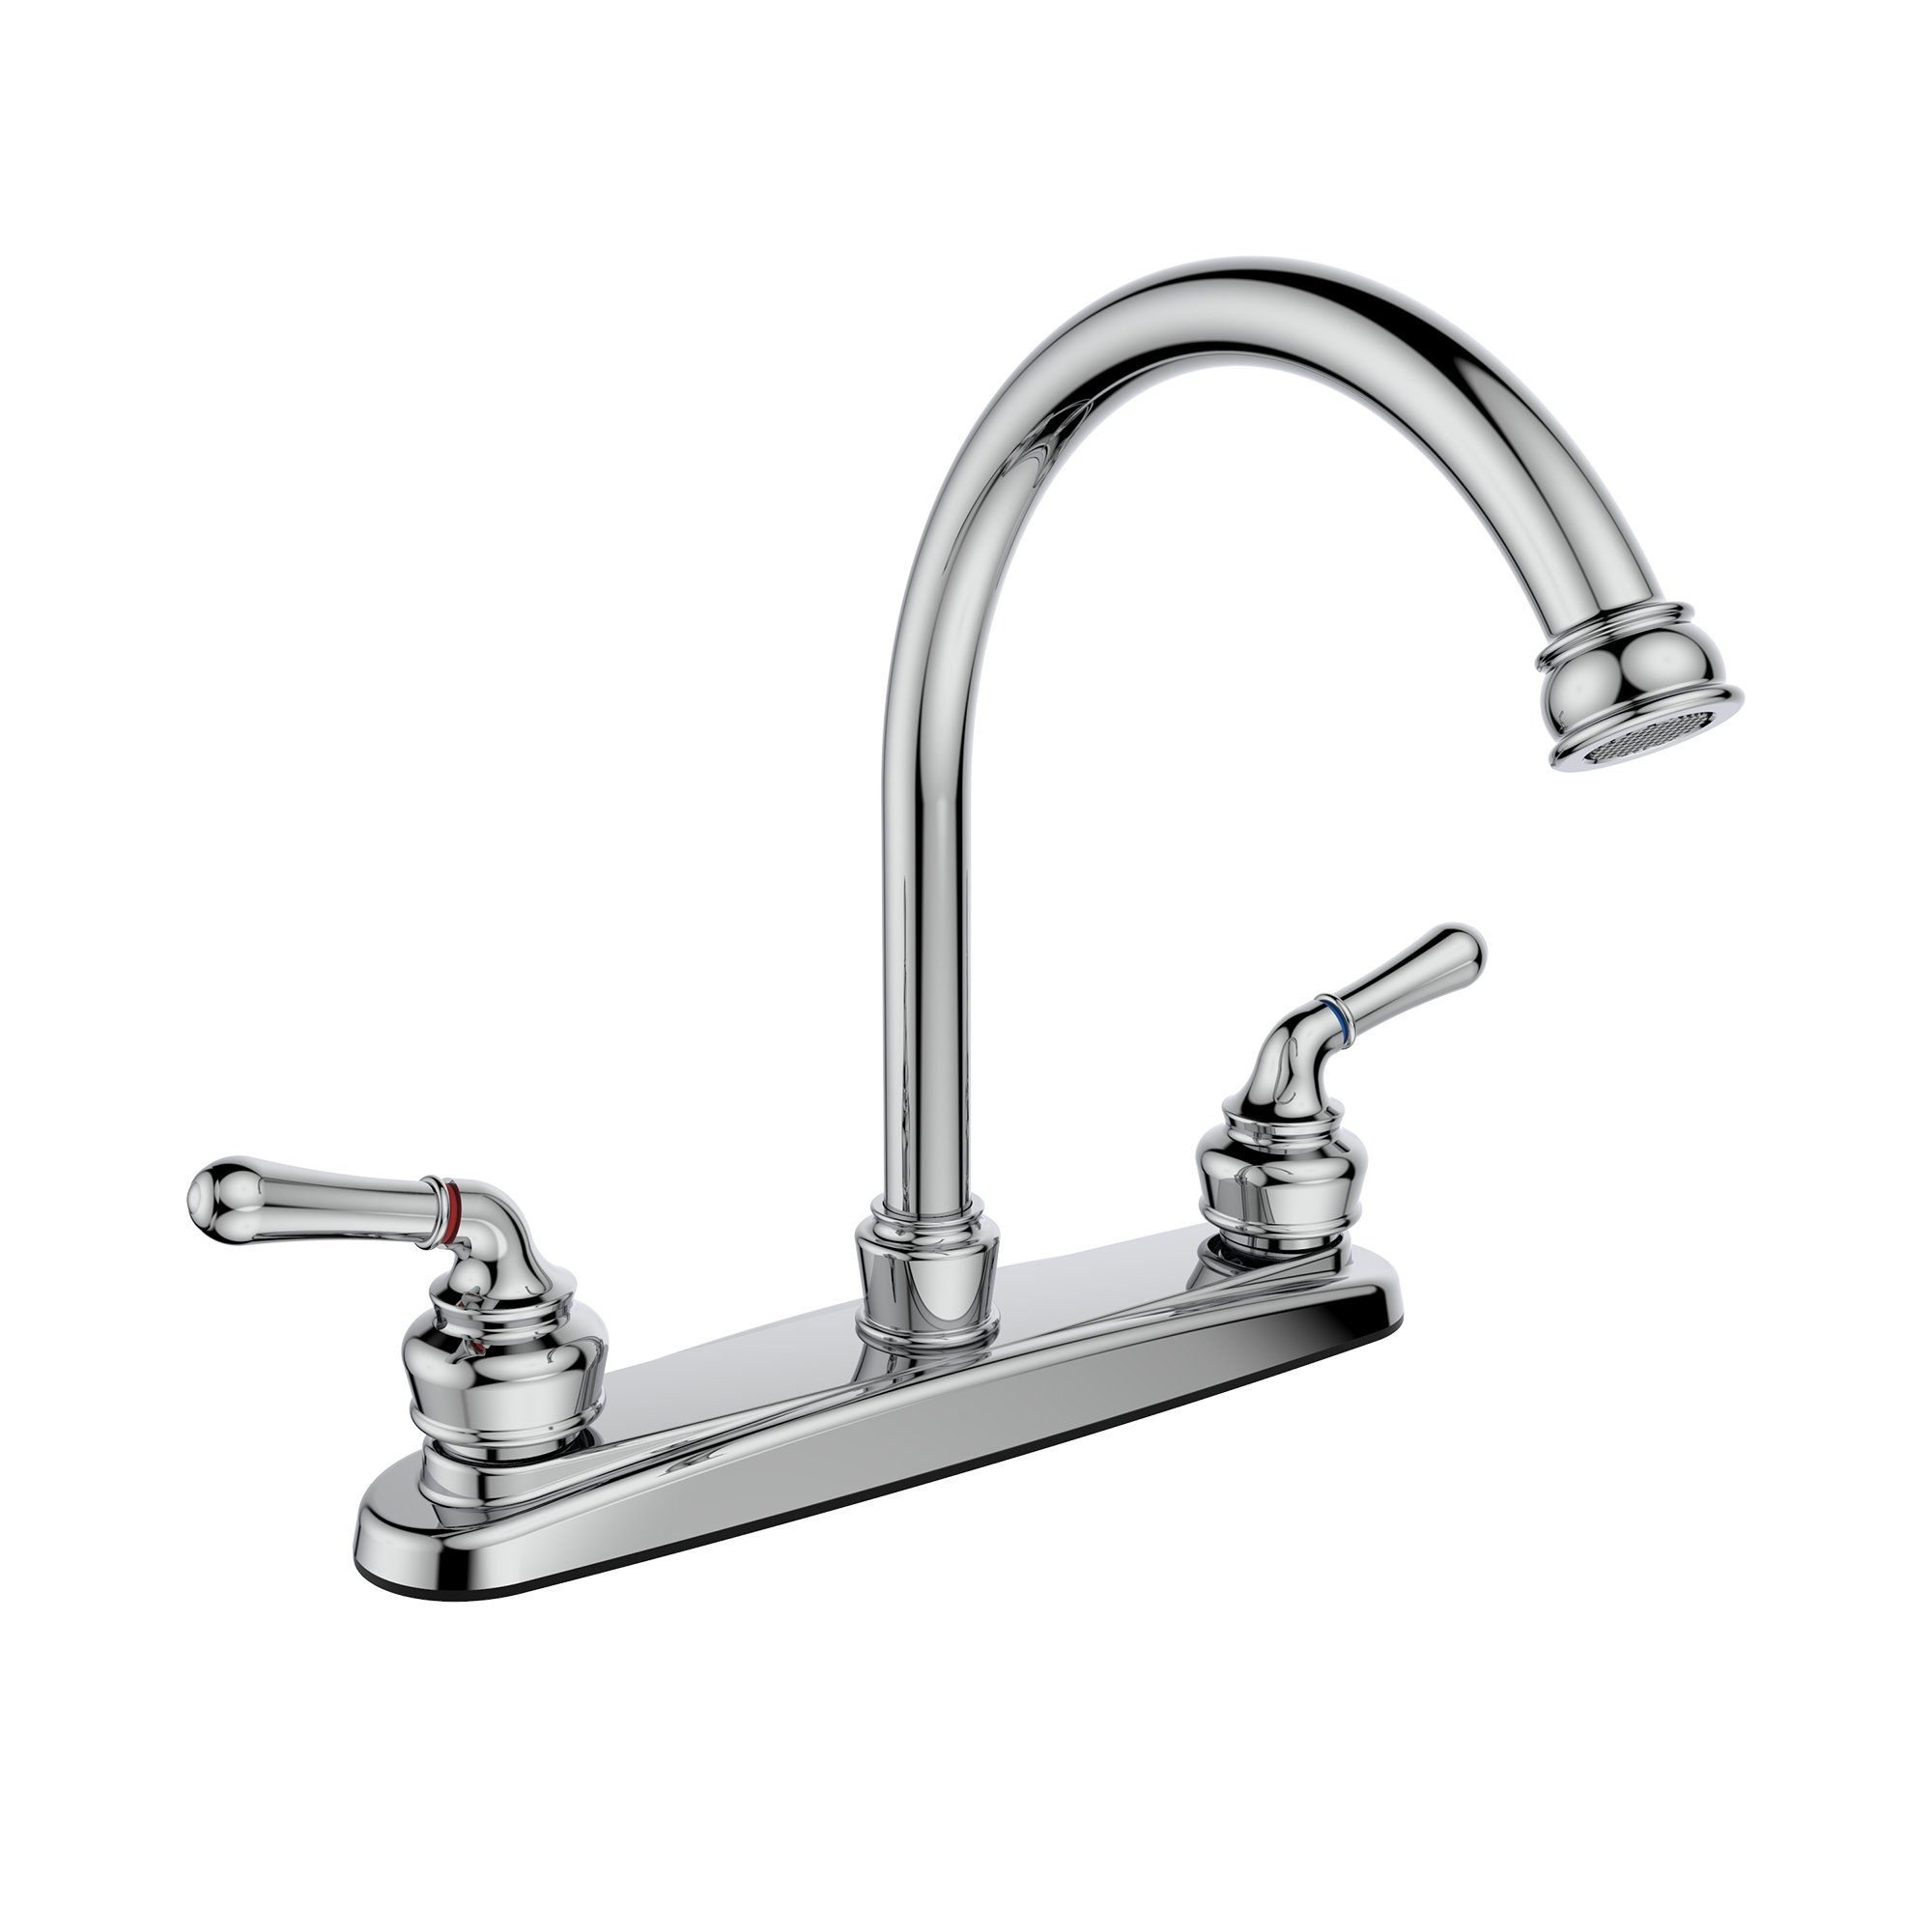 21485w Kitchen Sink Faucet With High Arc Spout & 2 Handles, Polished Chrome